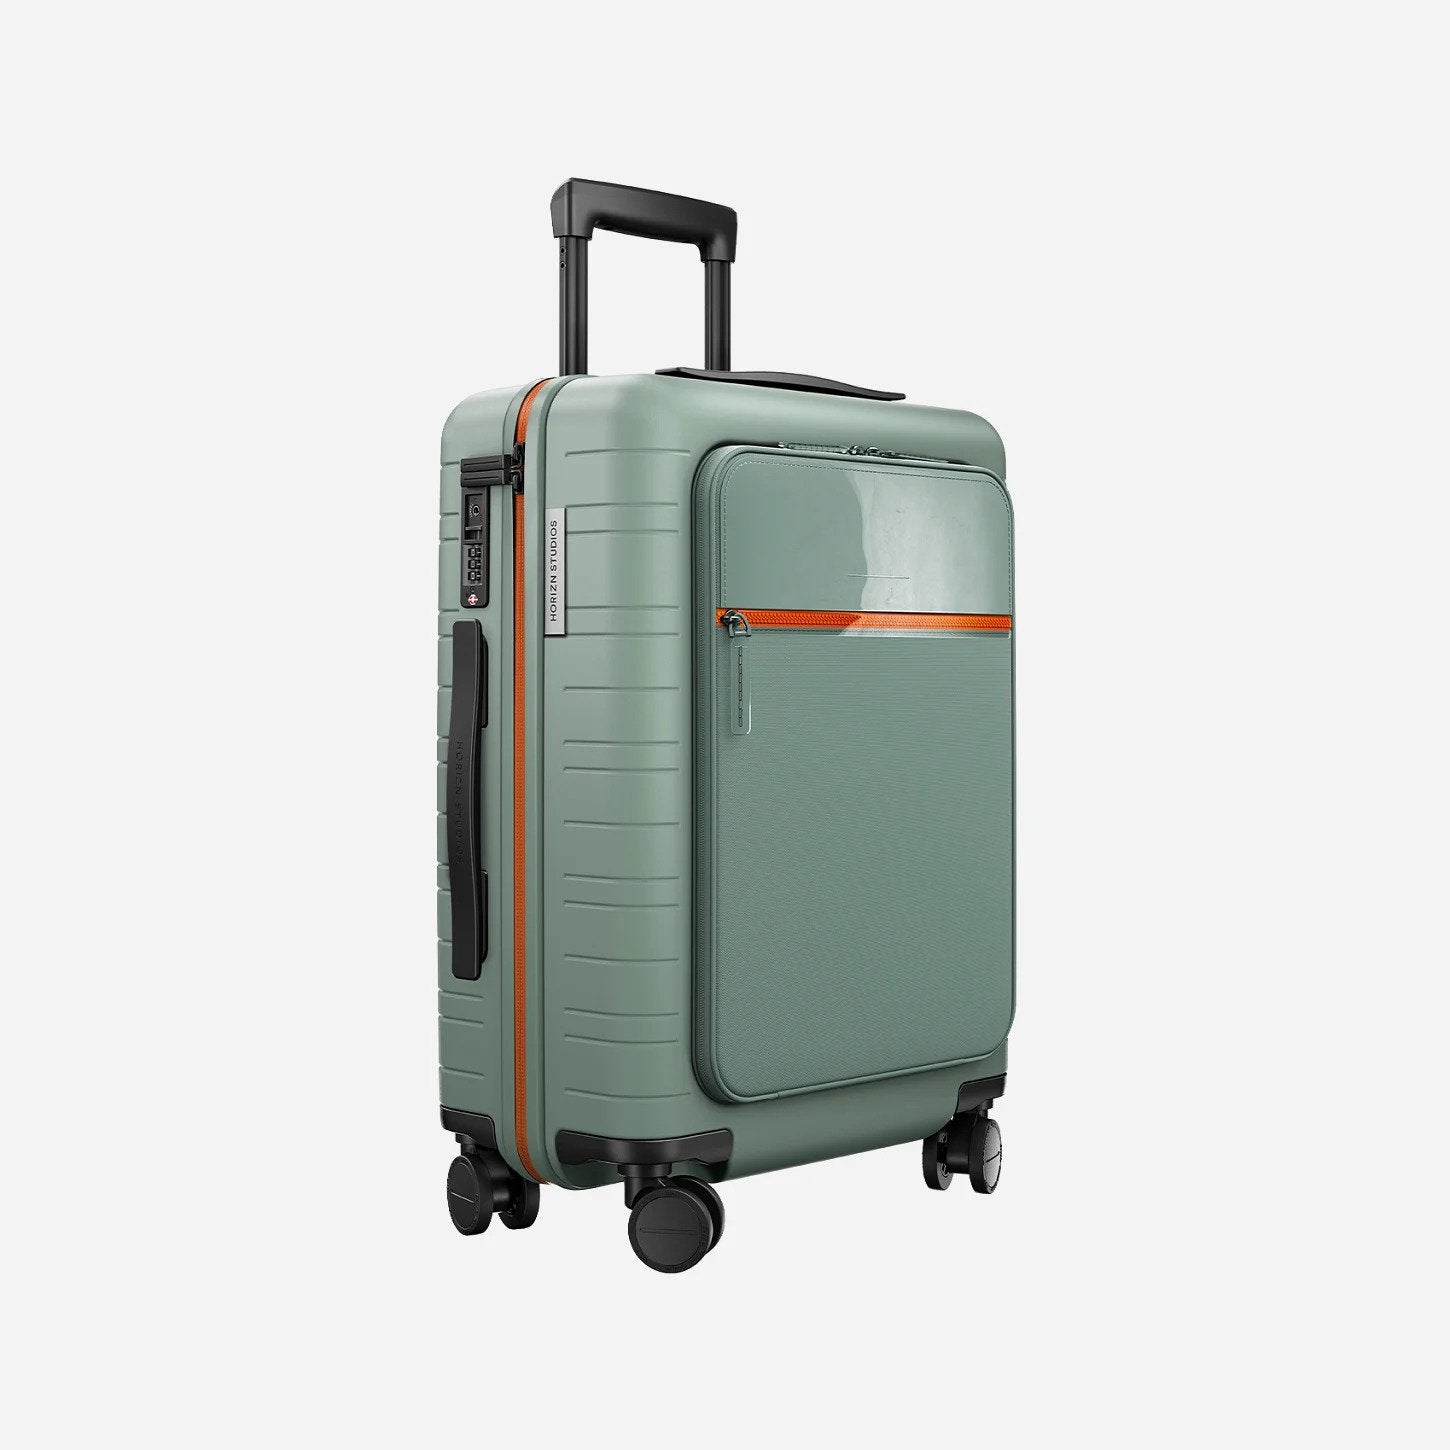 Hardside 25 Scribbles Luggage  Luggage, Luggage deals, Carryon luggage